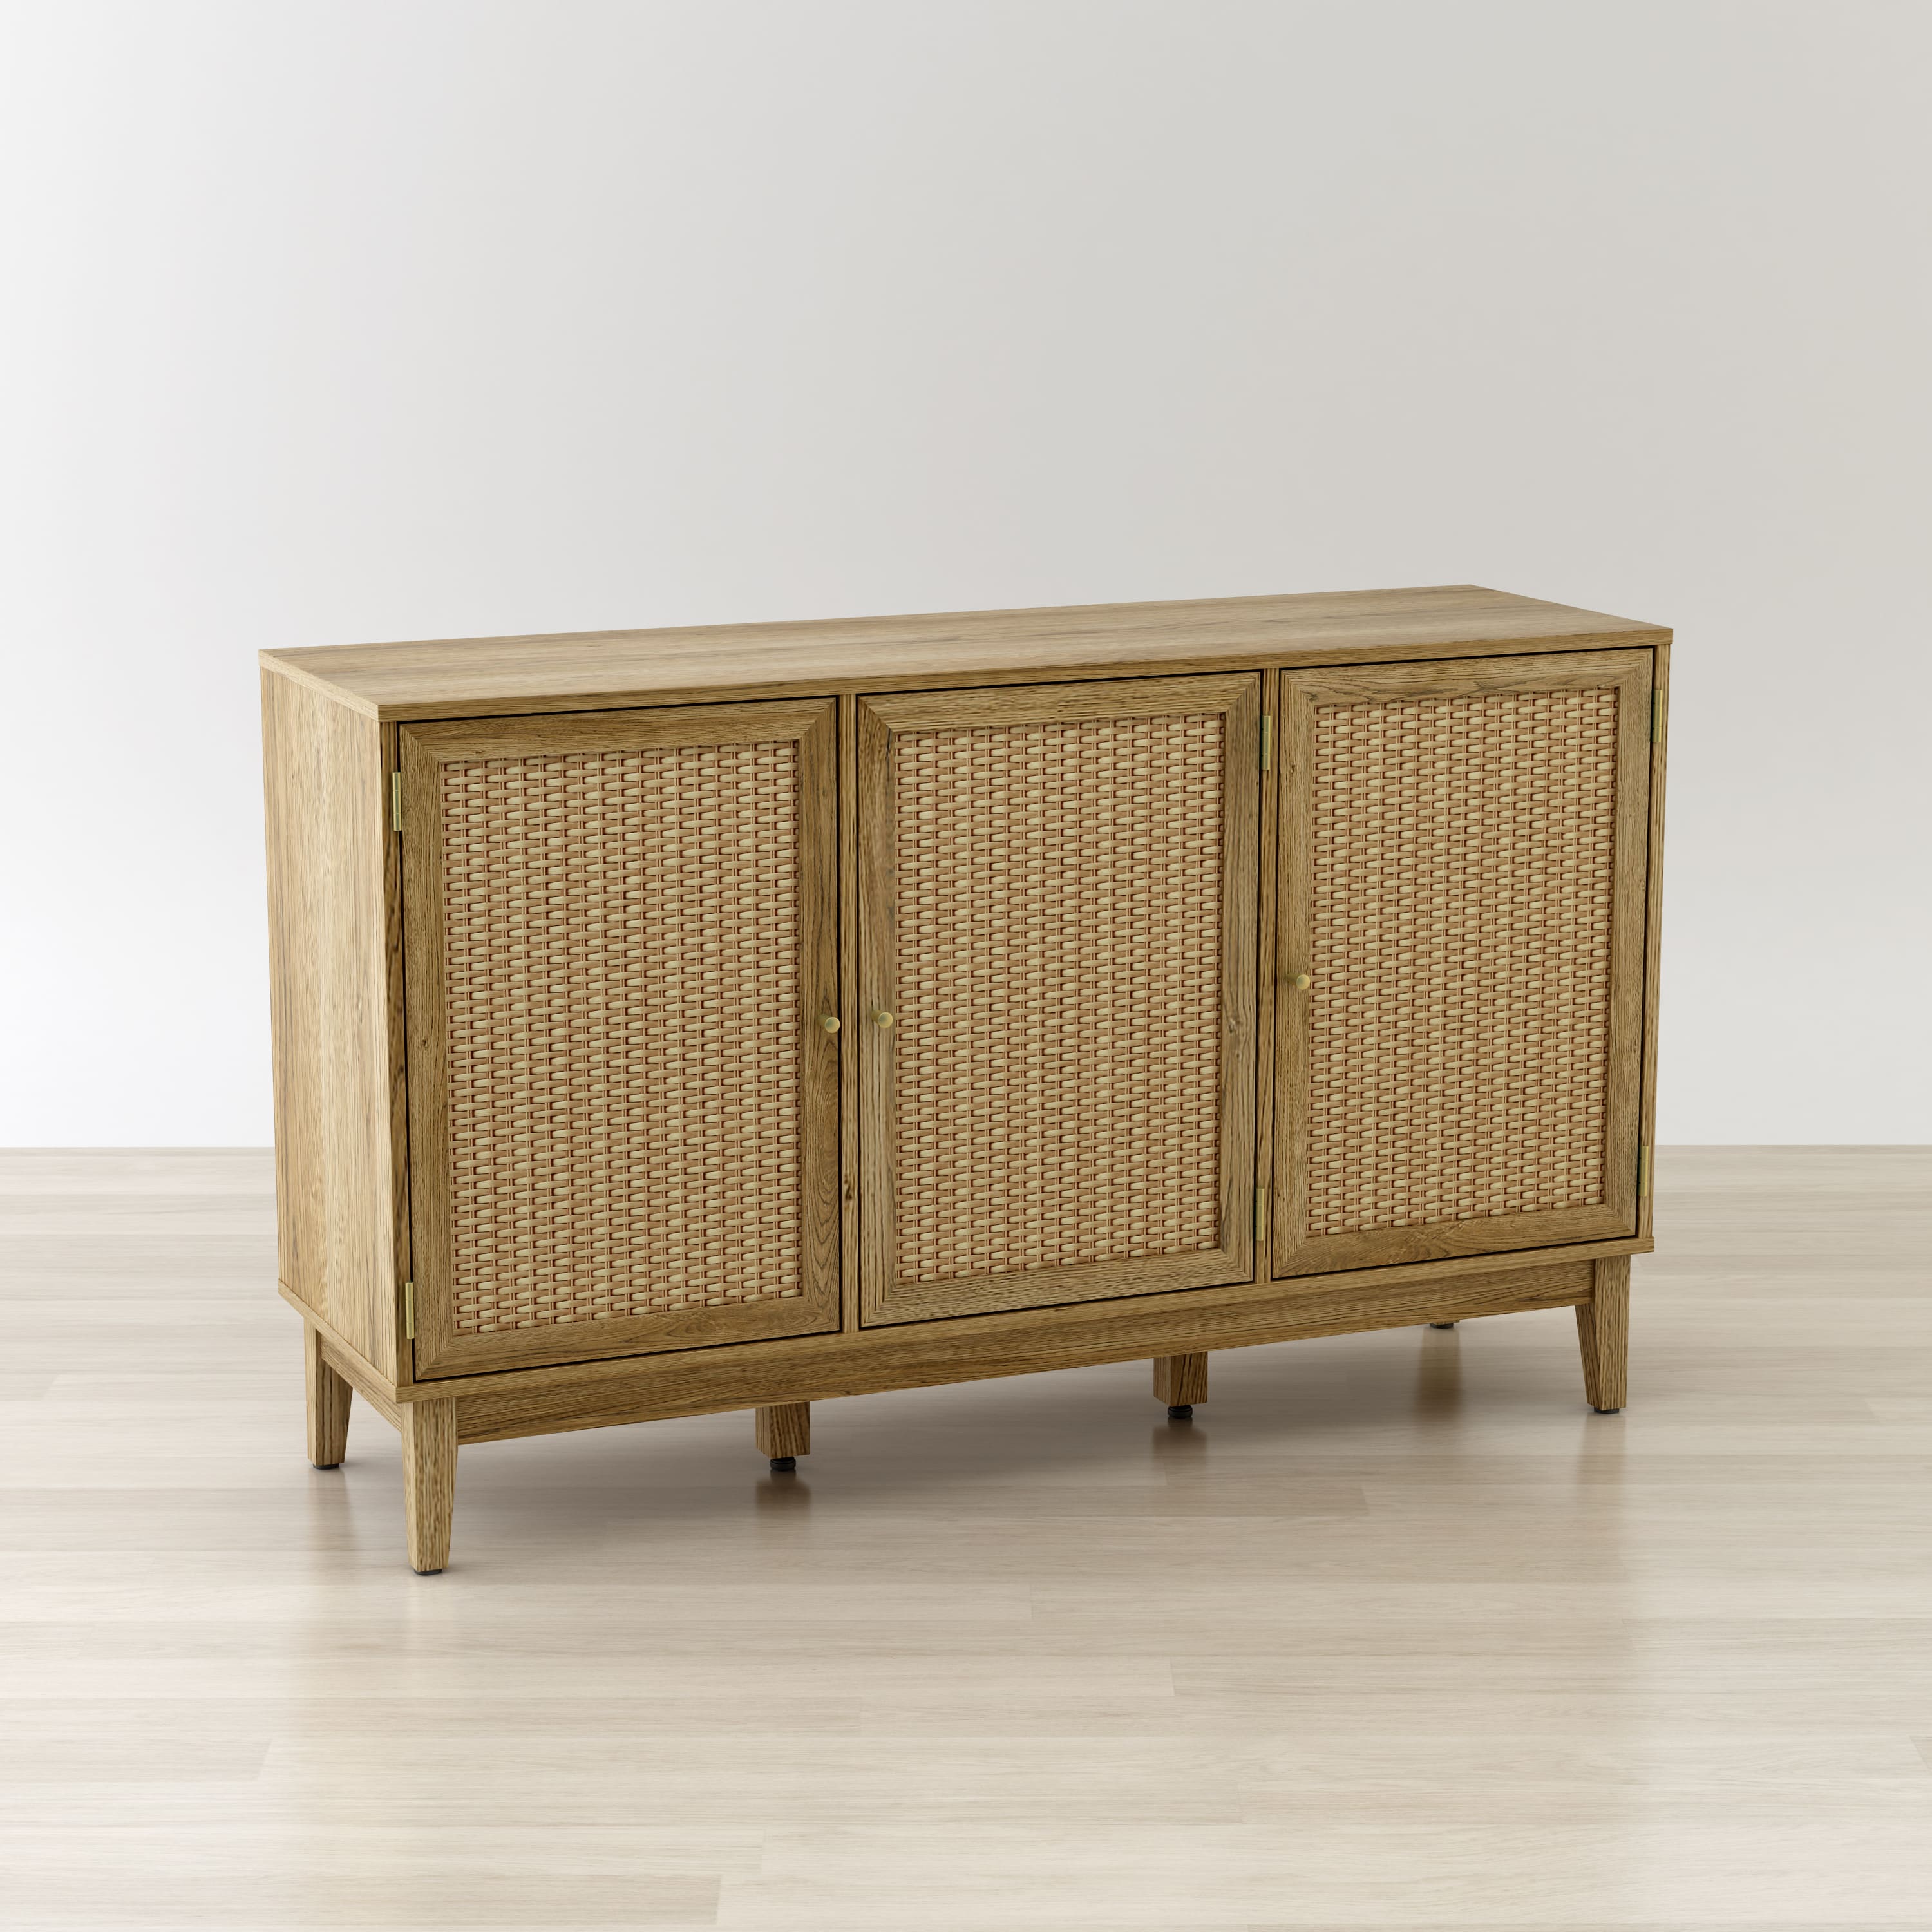 Anderson teak sideboards and cabinets